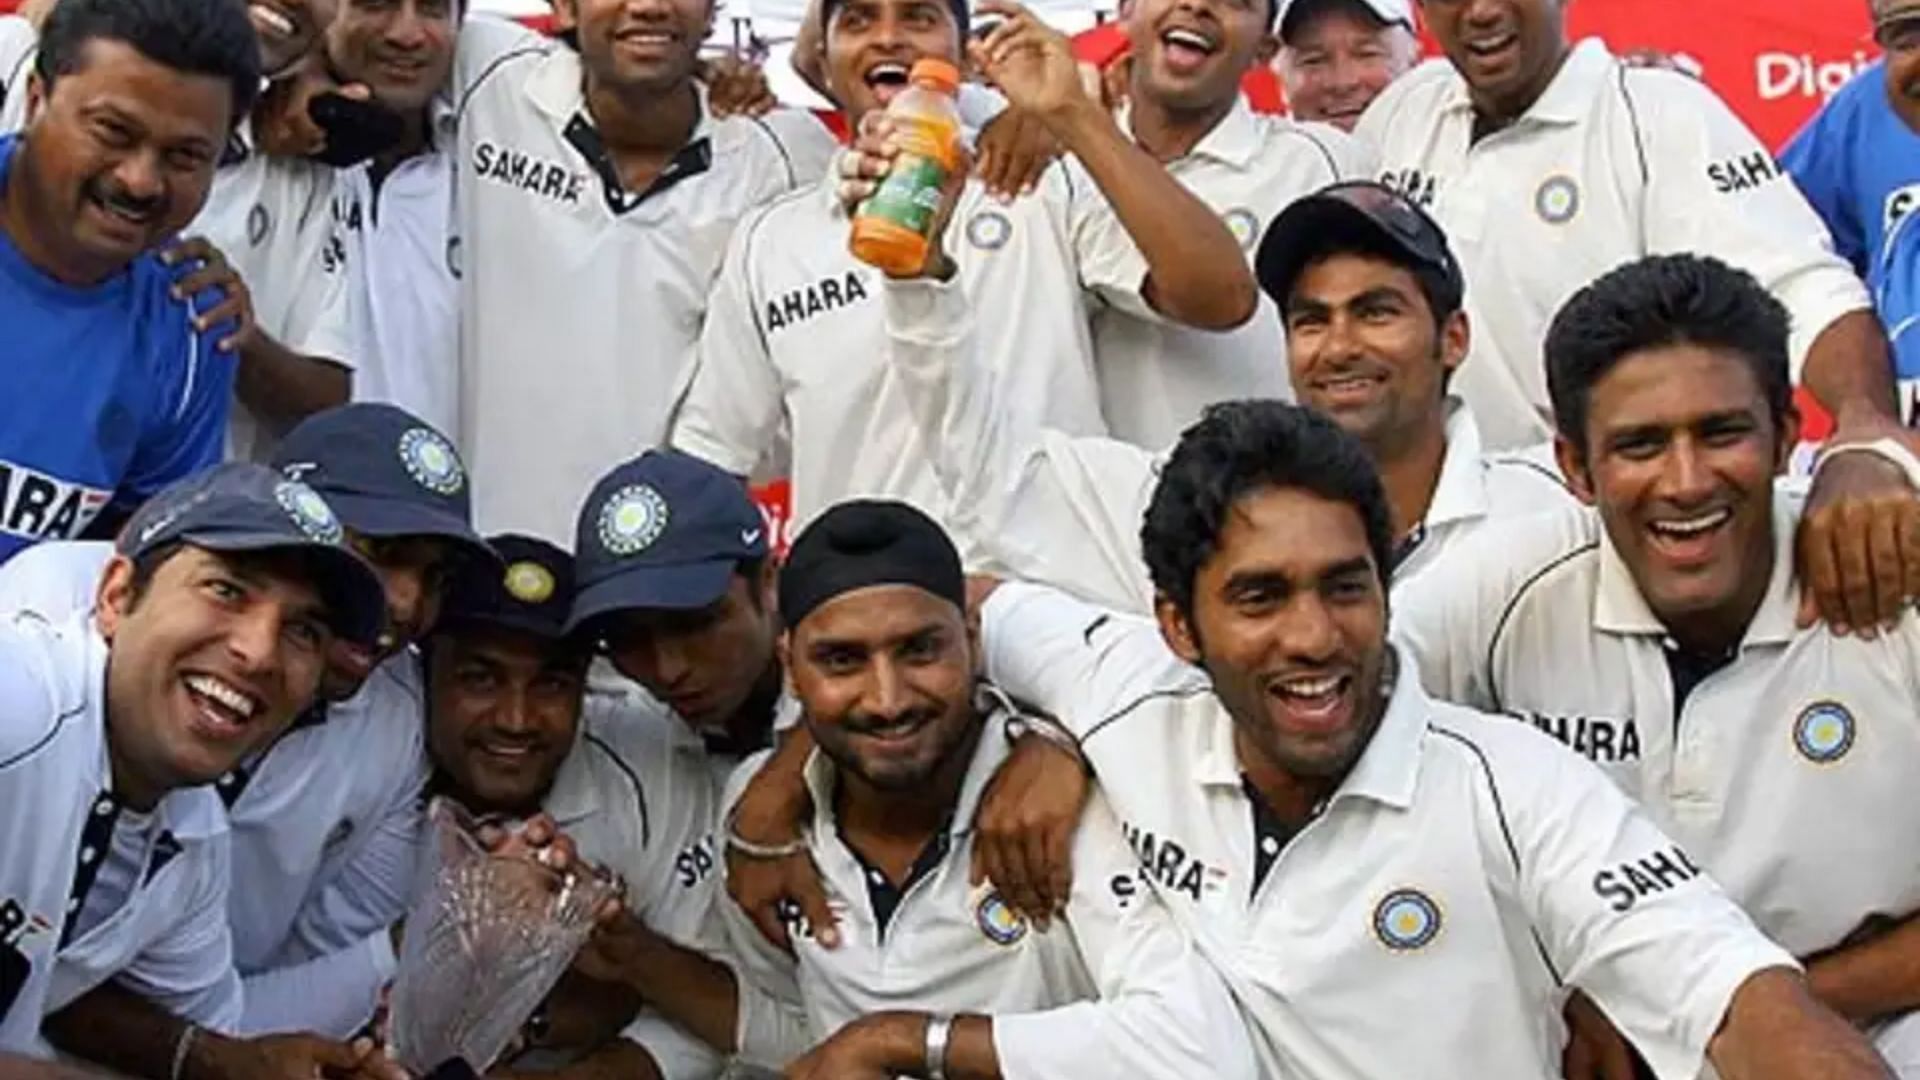 India won a 4-match series 1-0 with a dramatic win in the 4th Test.